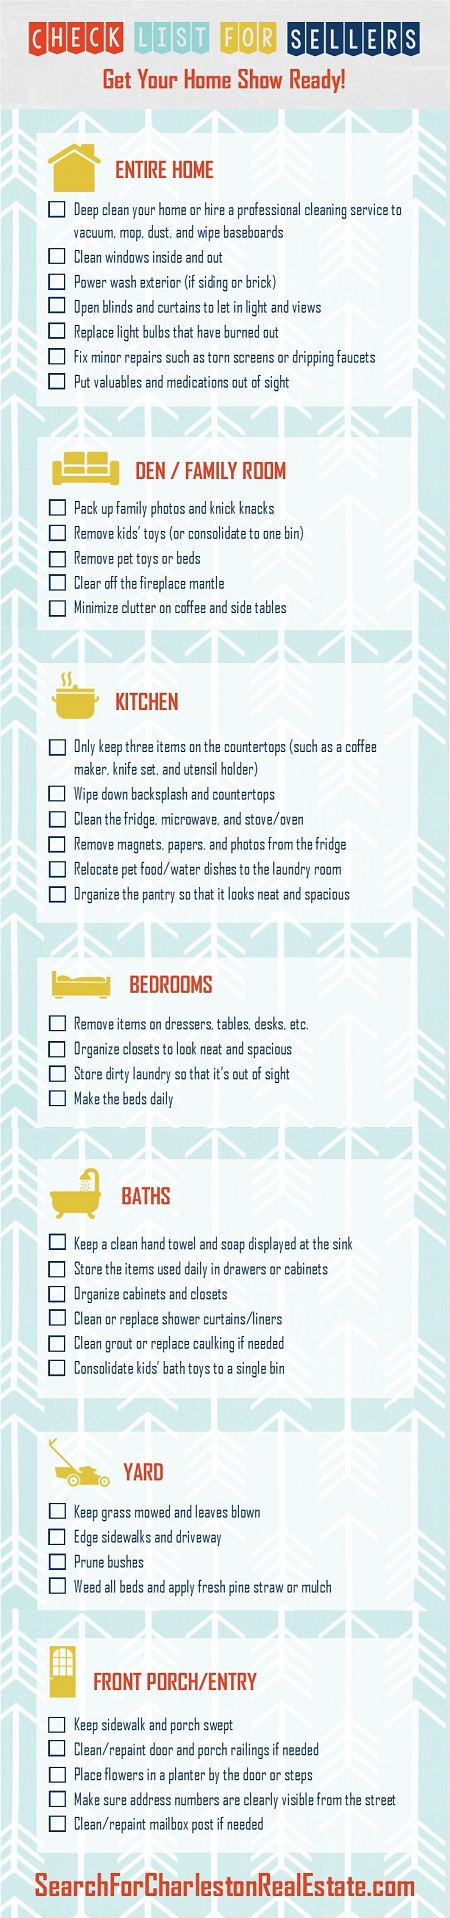 infographic check list to sellers to get their home ready for showings